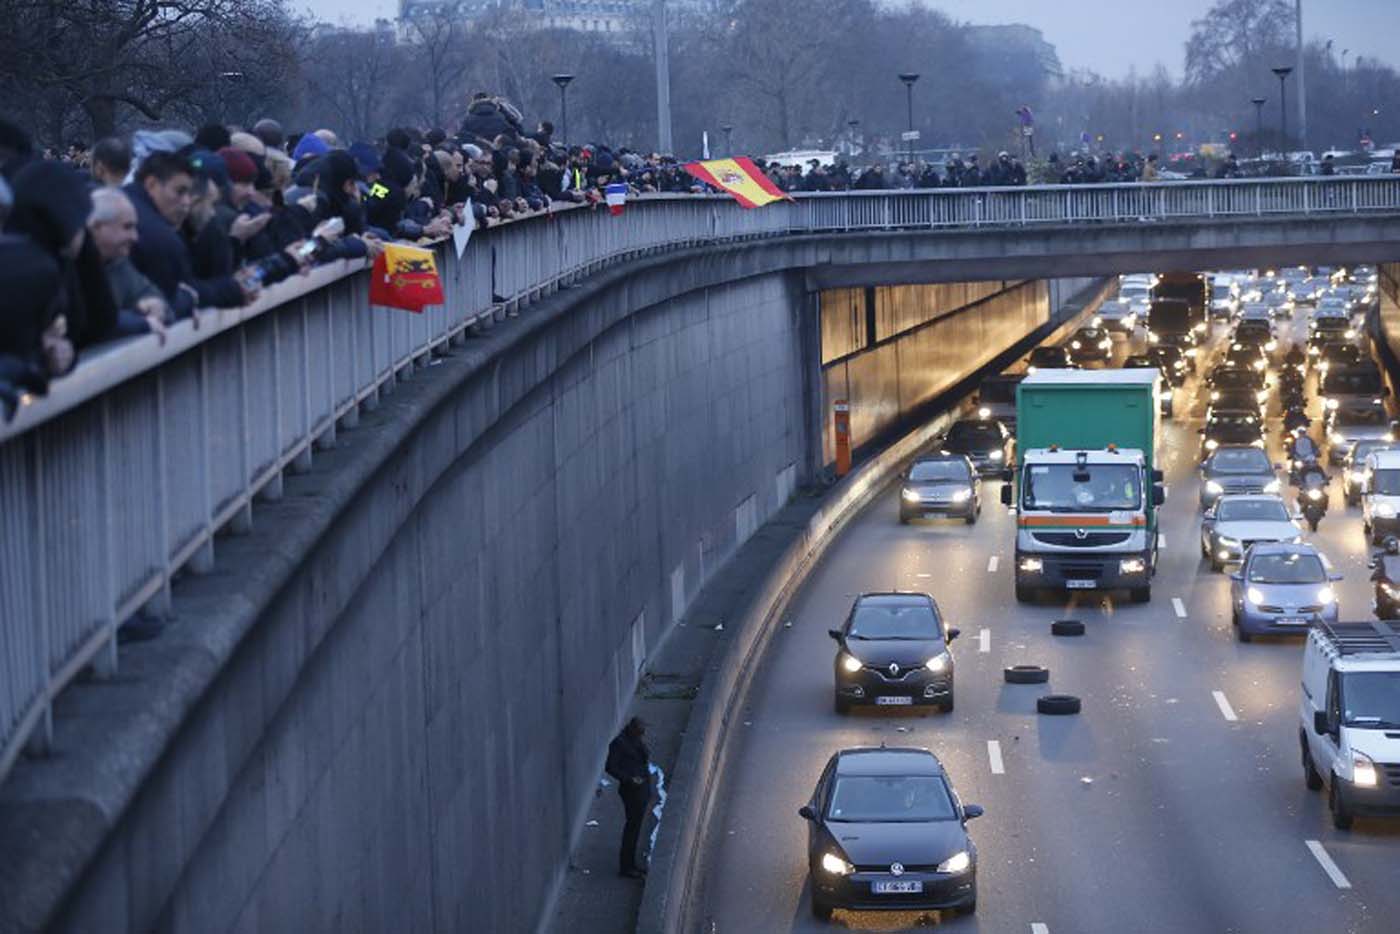 People and protestors with European countries flags stand above the ringroad (peripherique) during a taxi drivers demonstration against the VTC (transport vehicle with chauffeur) on January 26, 2016 early in the morning at porte Maillot in Paris. AFP PHOTO / THOMAS SAMSON / AFP / THOMAS SAMSON